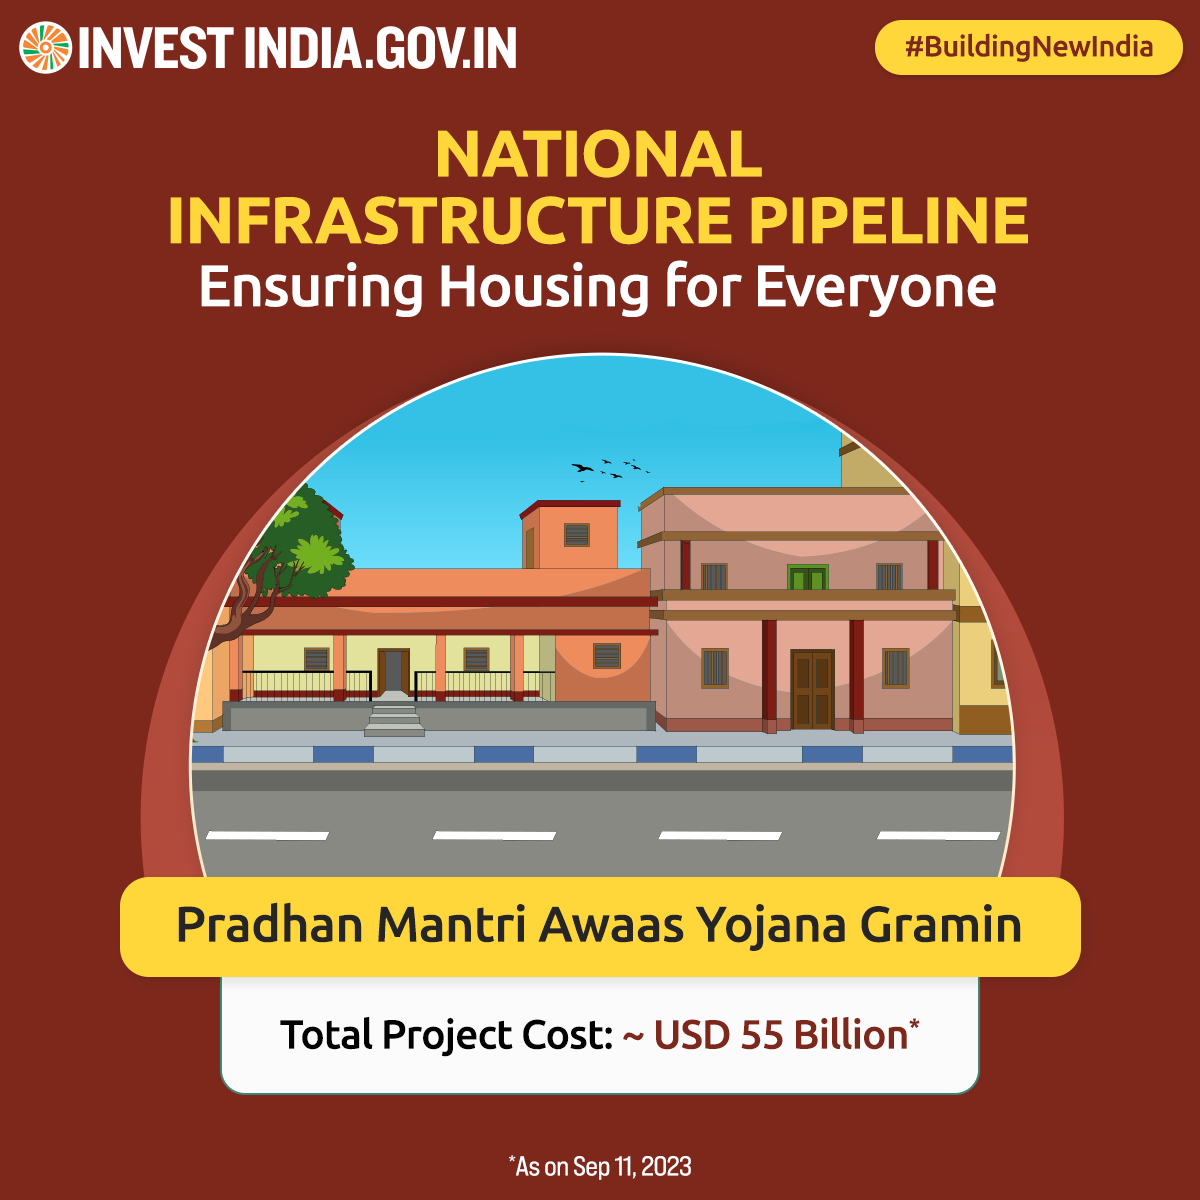 Pradhan Mantri Awaas Yojana Gramin Scheme  assists eligible rural households to construct ~3 Crore houses with basic amenities to achieve the objective of #HousingForAll across India.

Know more: bit.ly/page_NIP

#NationalInfrastructurePipeline #BuildingNewIndia #NIP